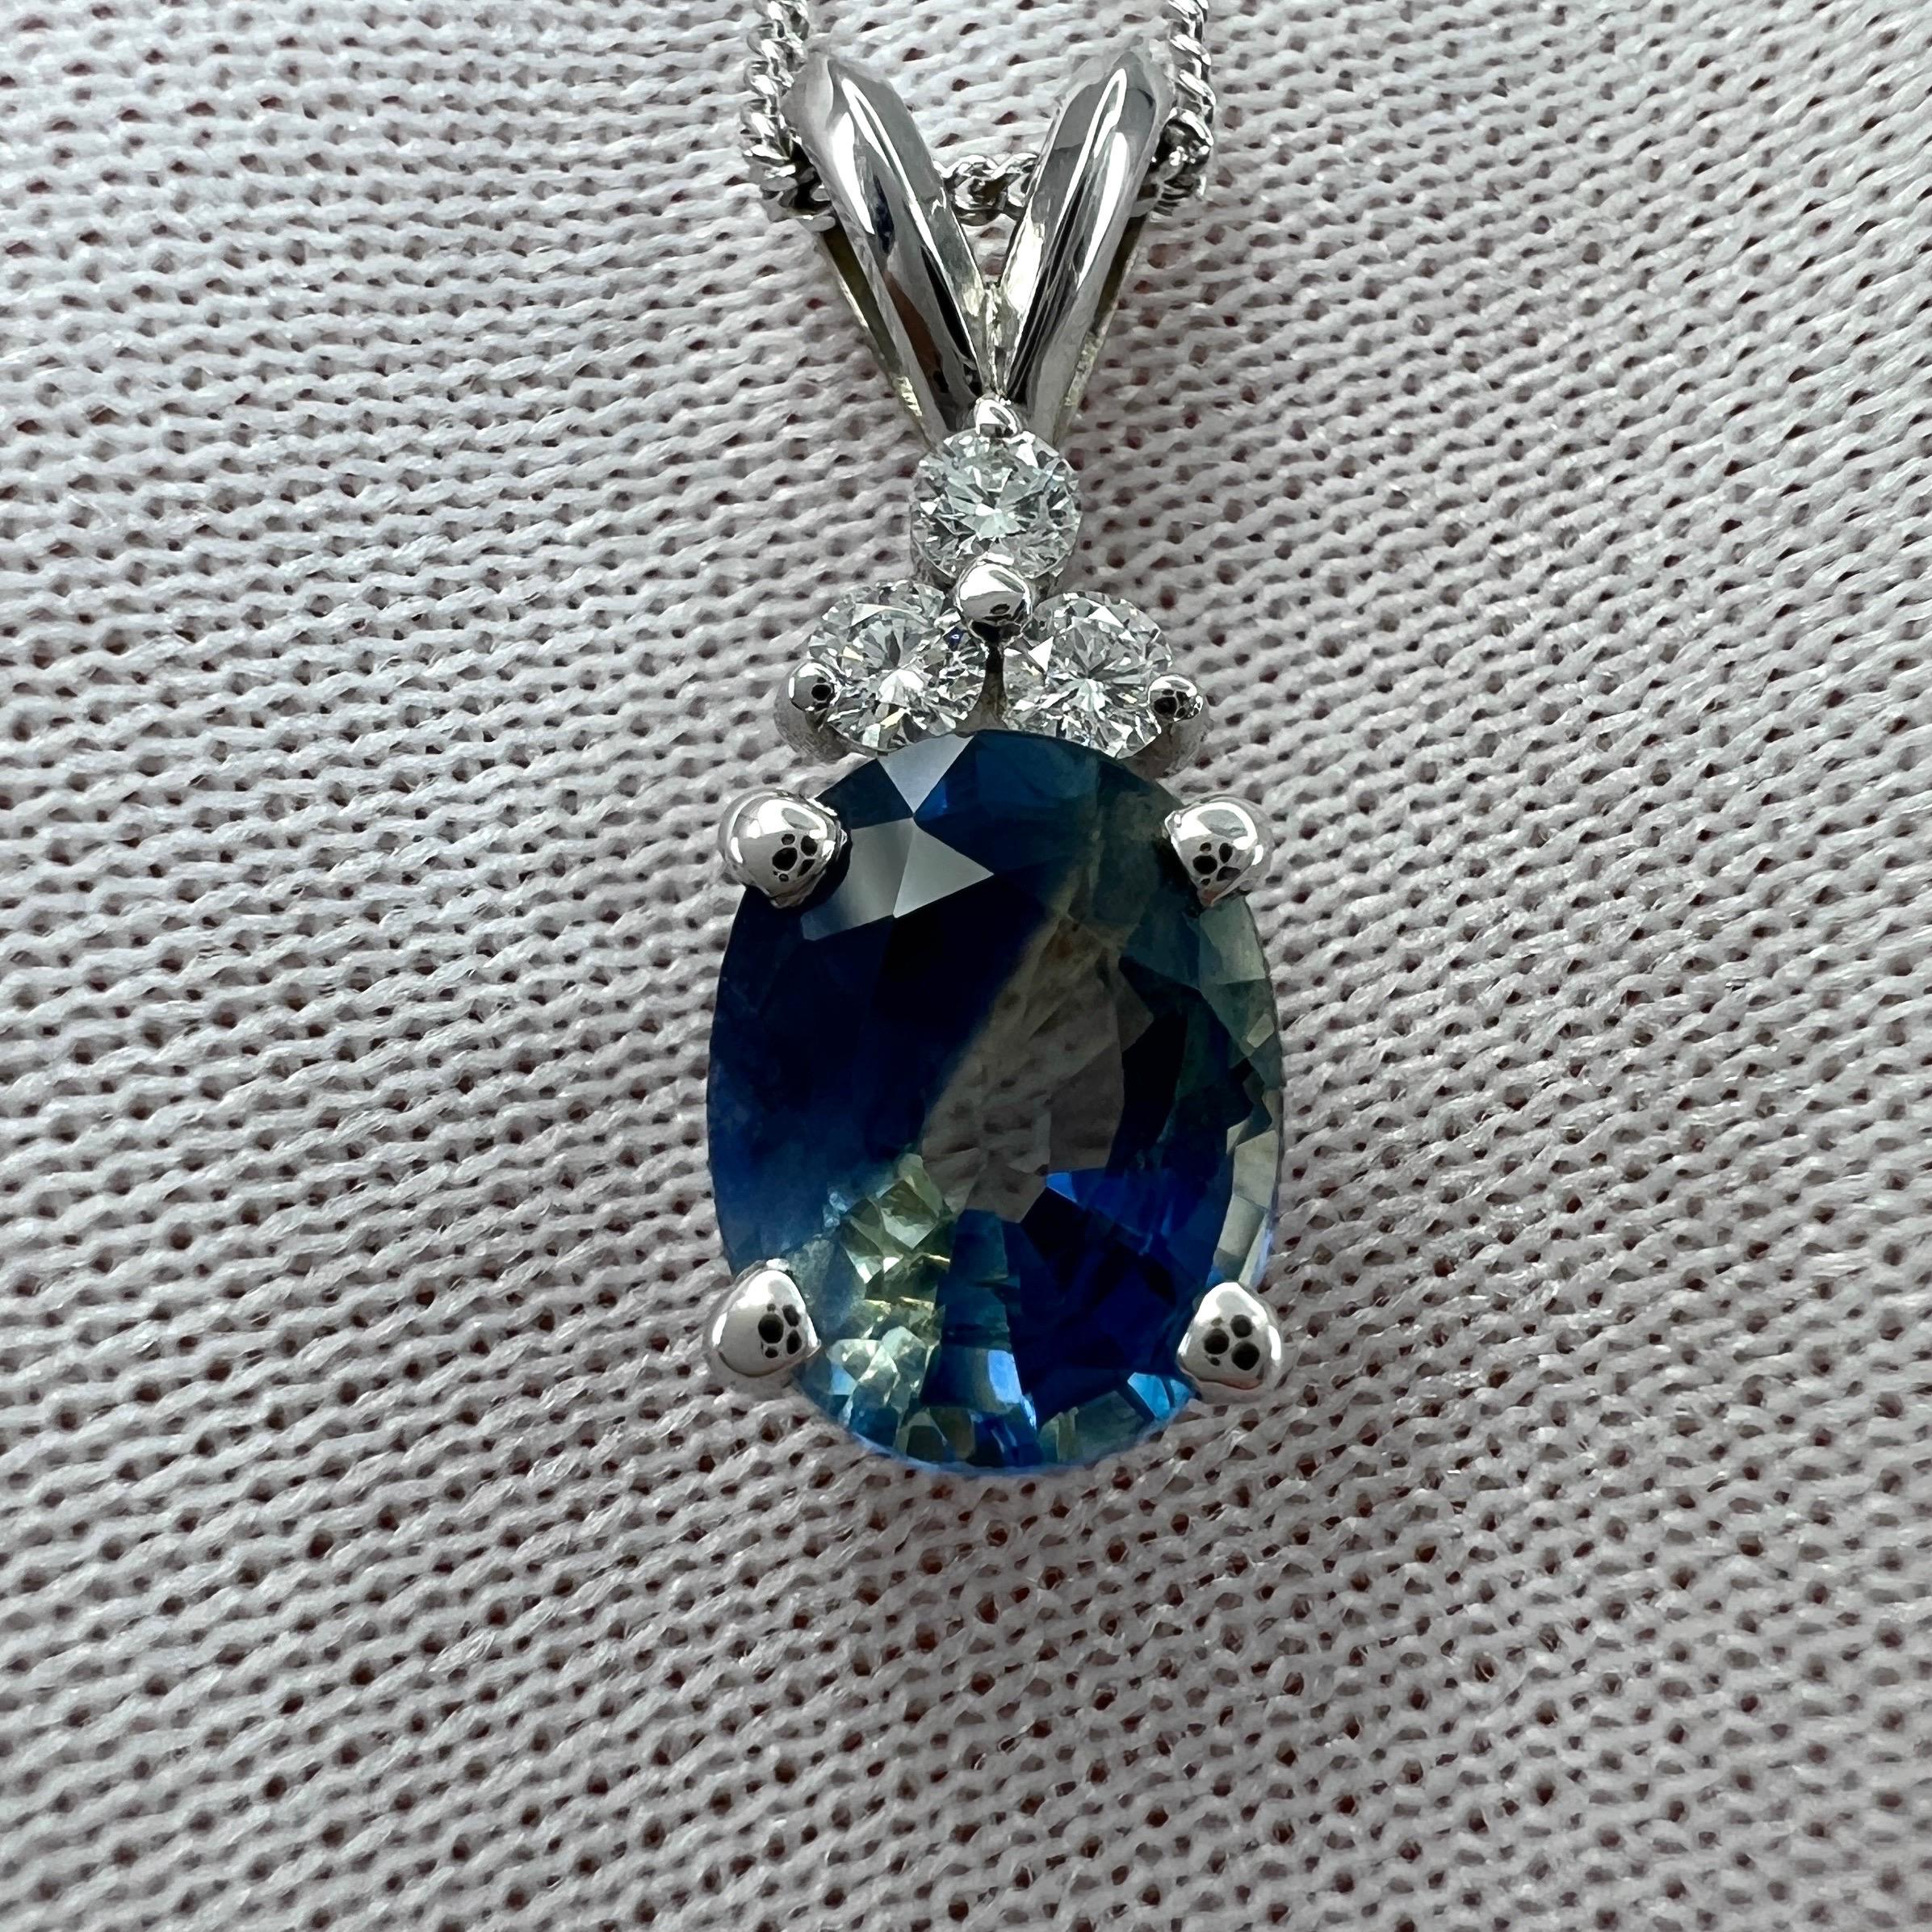 Natural Untreated Bi Colour Sapphire & Diamond 18k White Gold Pendant Necklace.

Rare GIA Certified 1.67 carat natural untreated sapphire with a unique blue - yellow bi colour effect. Very rare and stunning to see, similarly seen in ametrine and